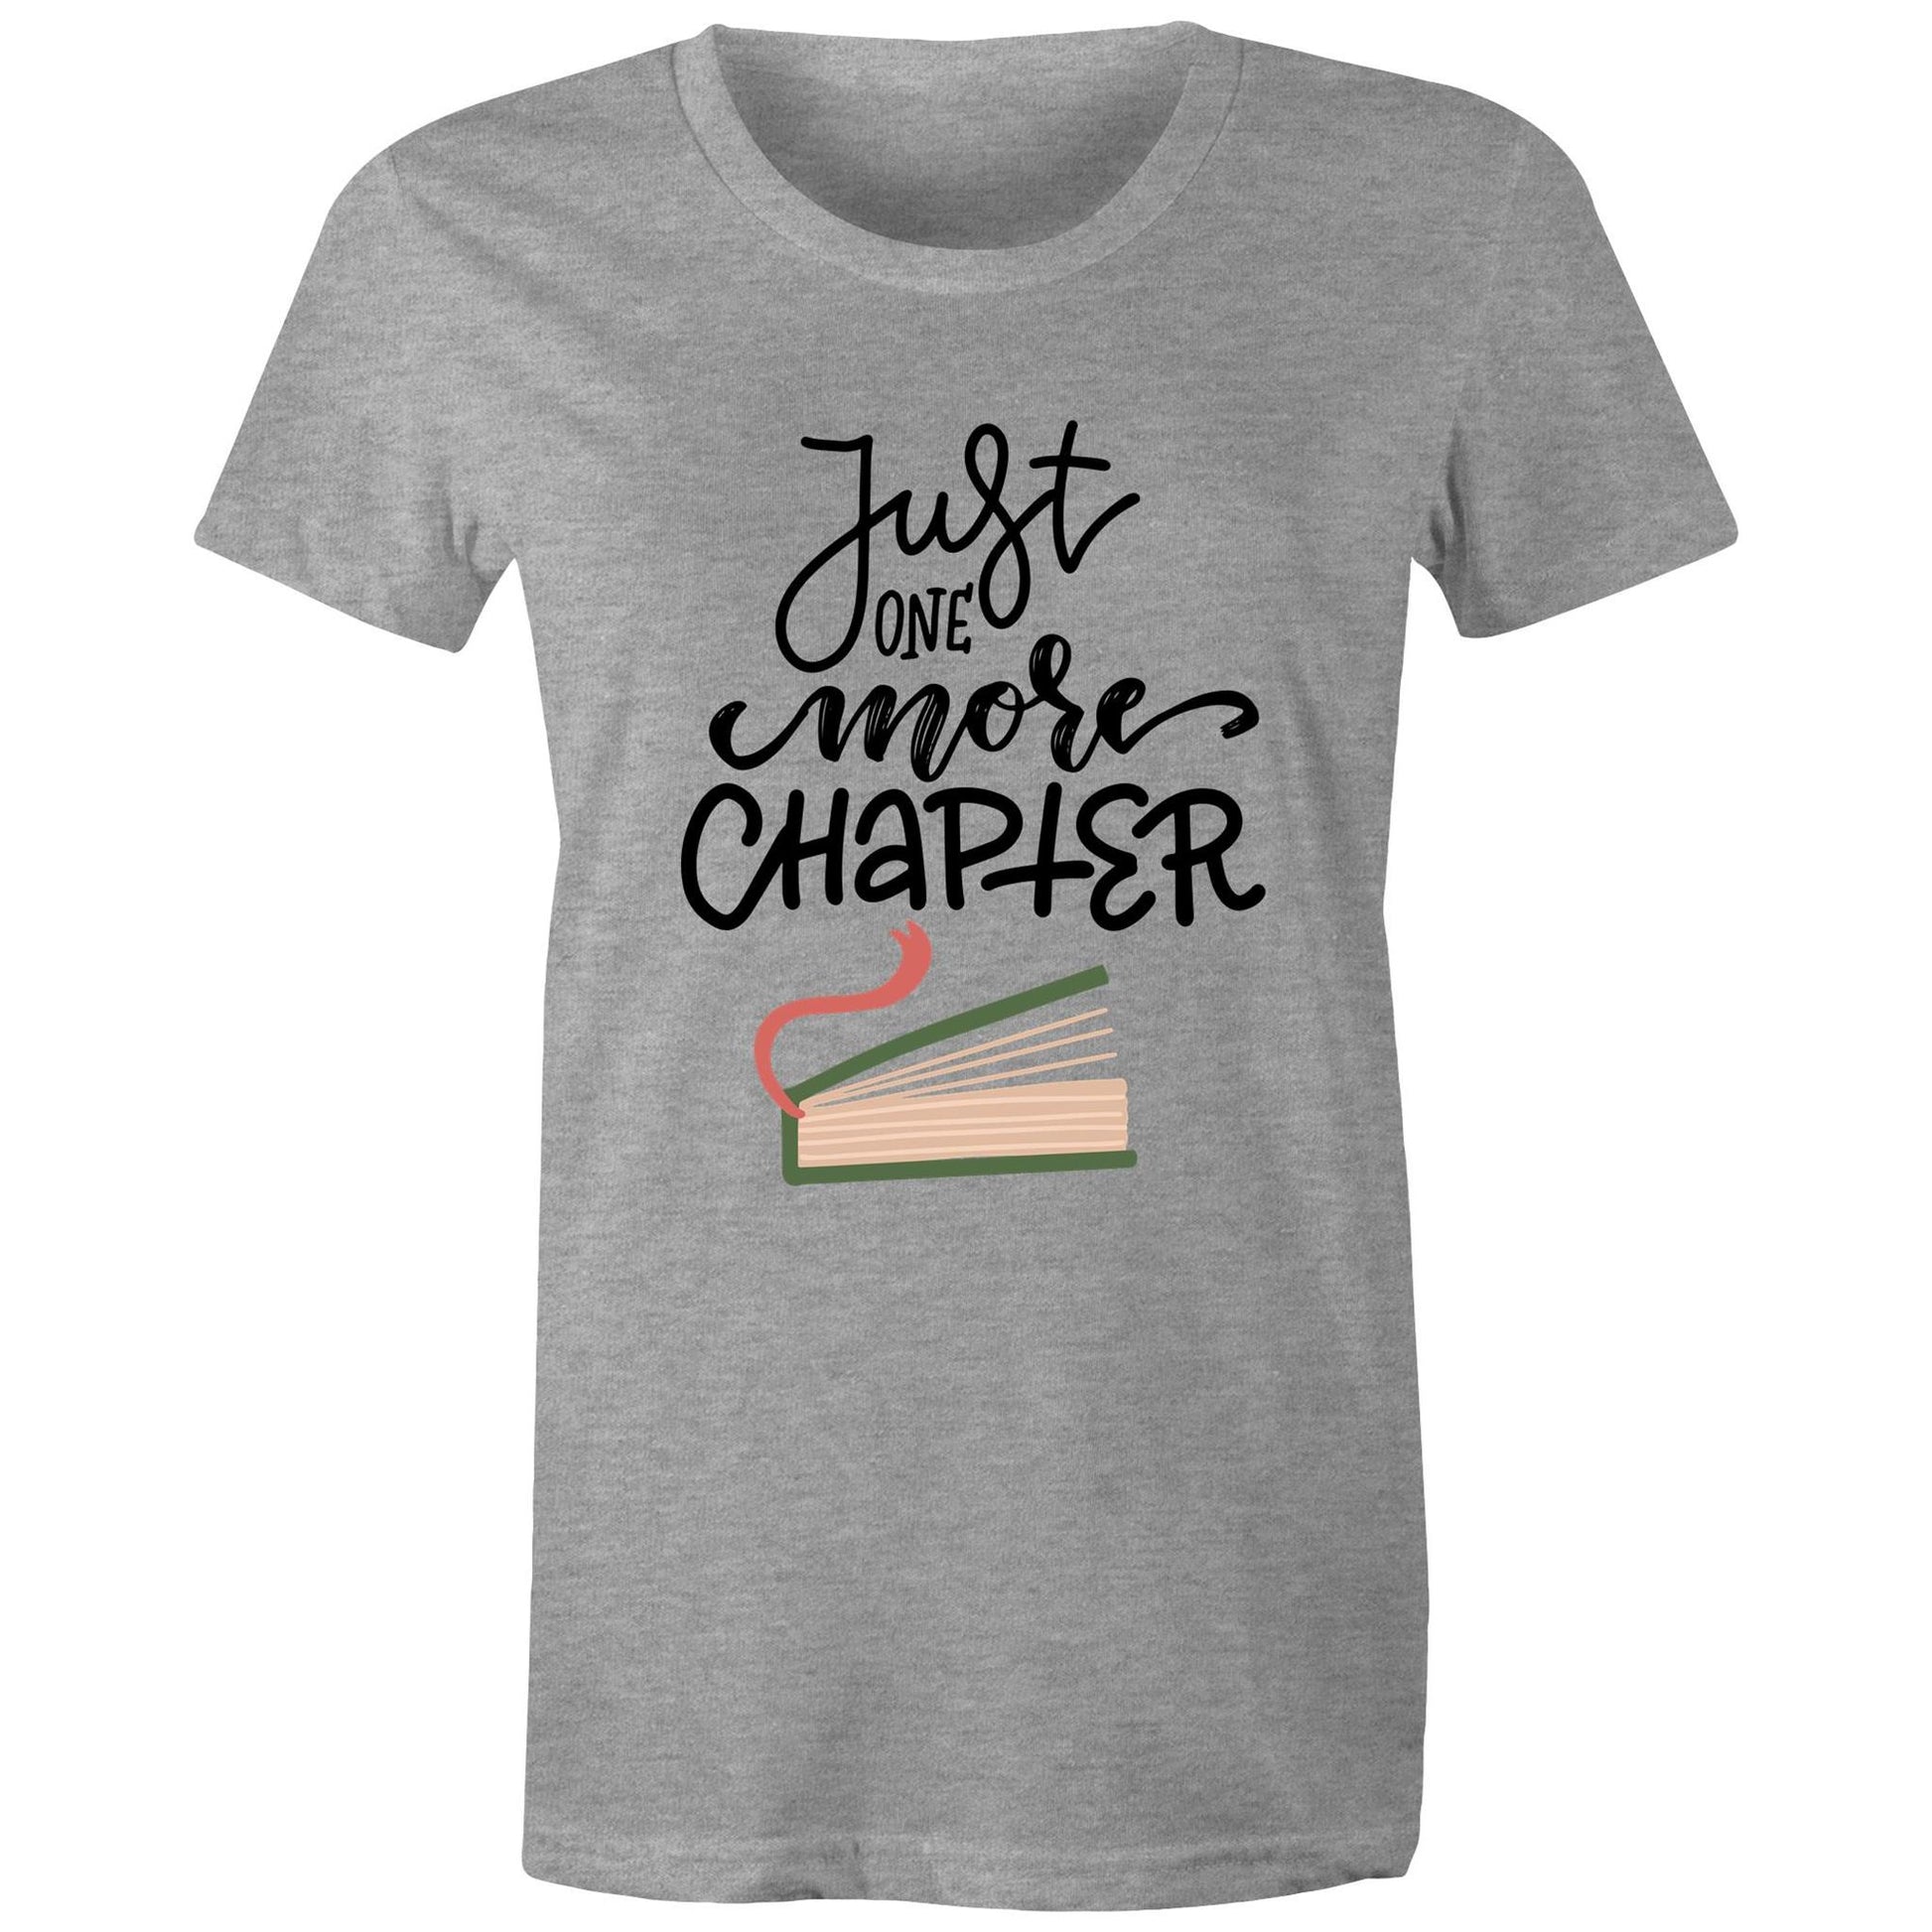 Just One More Chapter - Womens T-shirt Grey Marle Womens T-shirt Reading